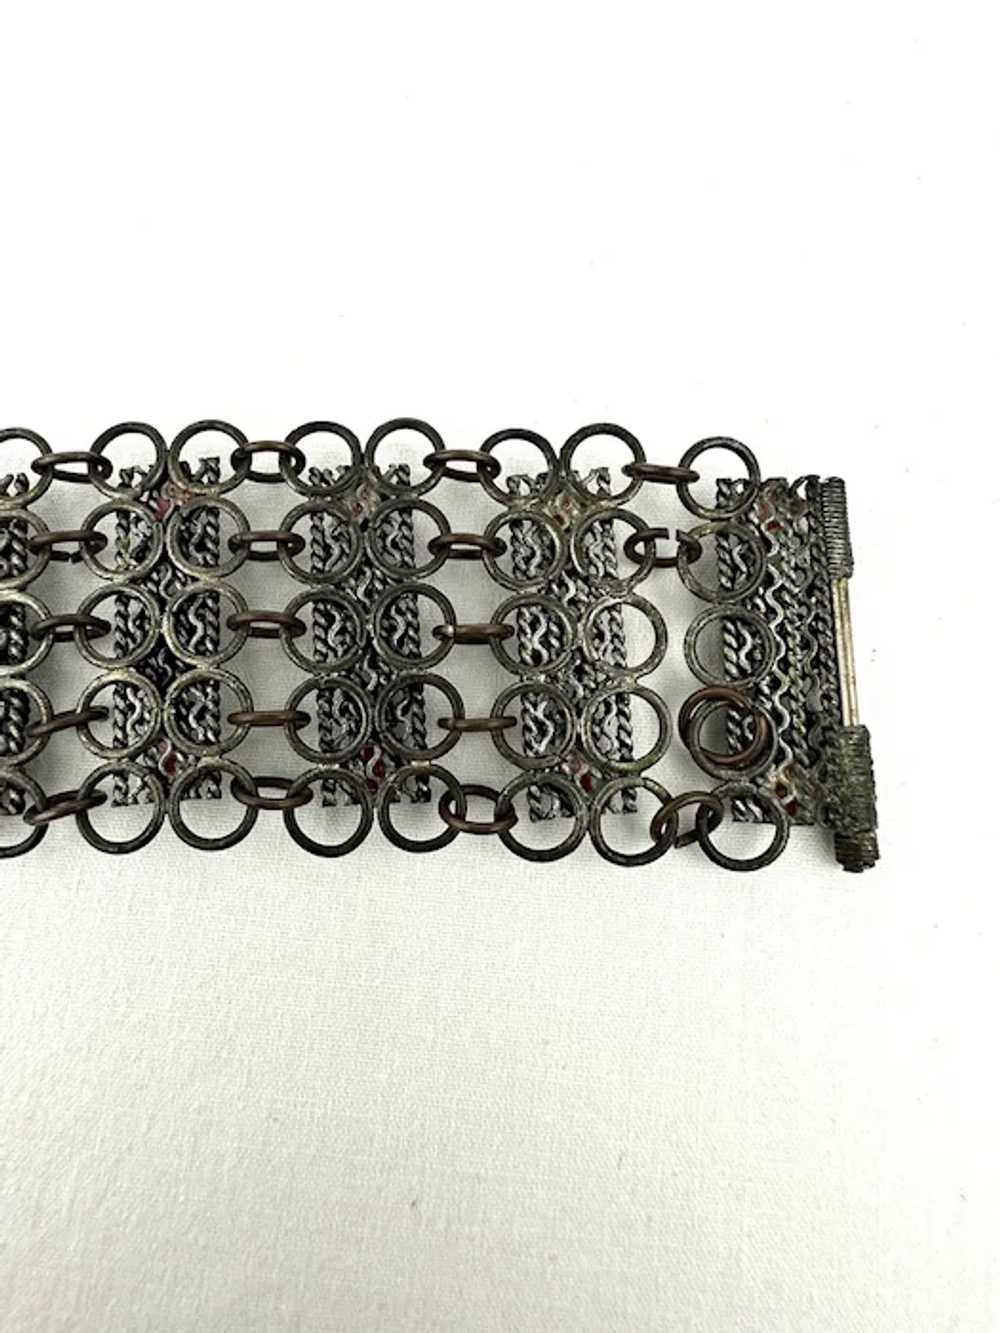 Art Deco Chain Mail and Coral Glass Cuff Bracelet - image 6